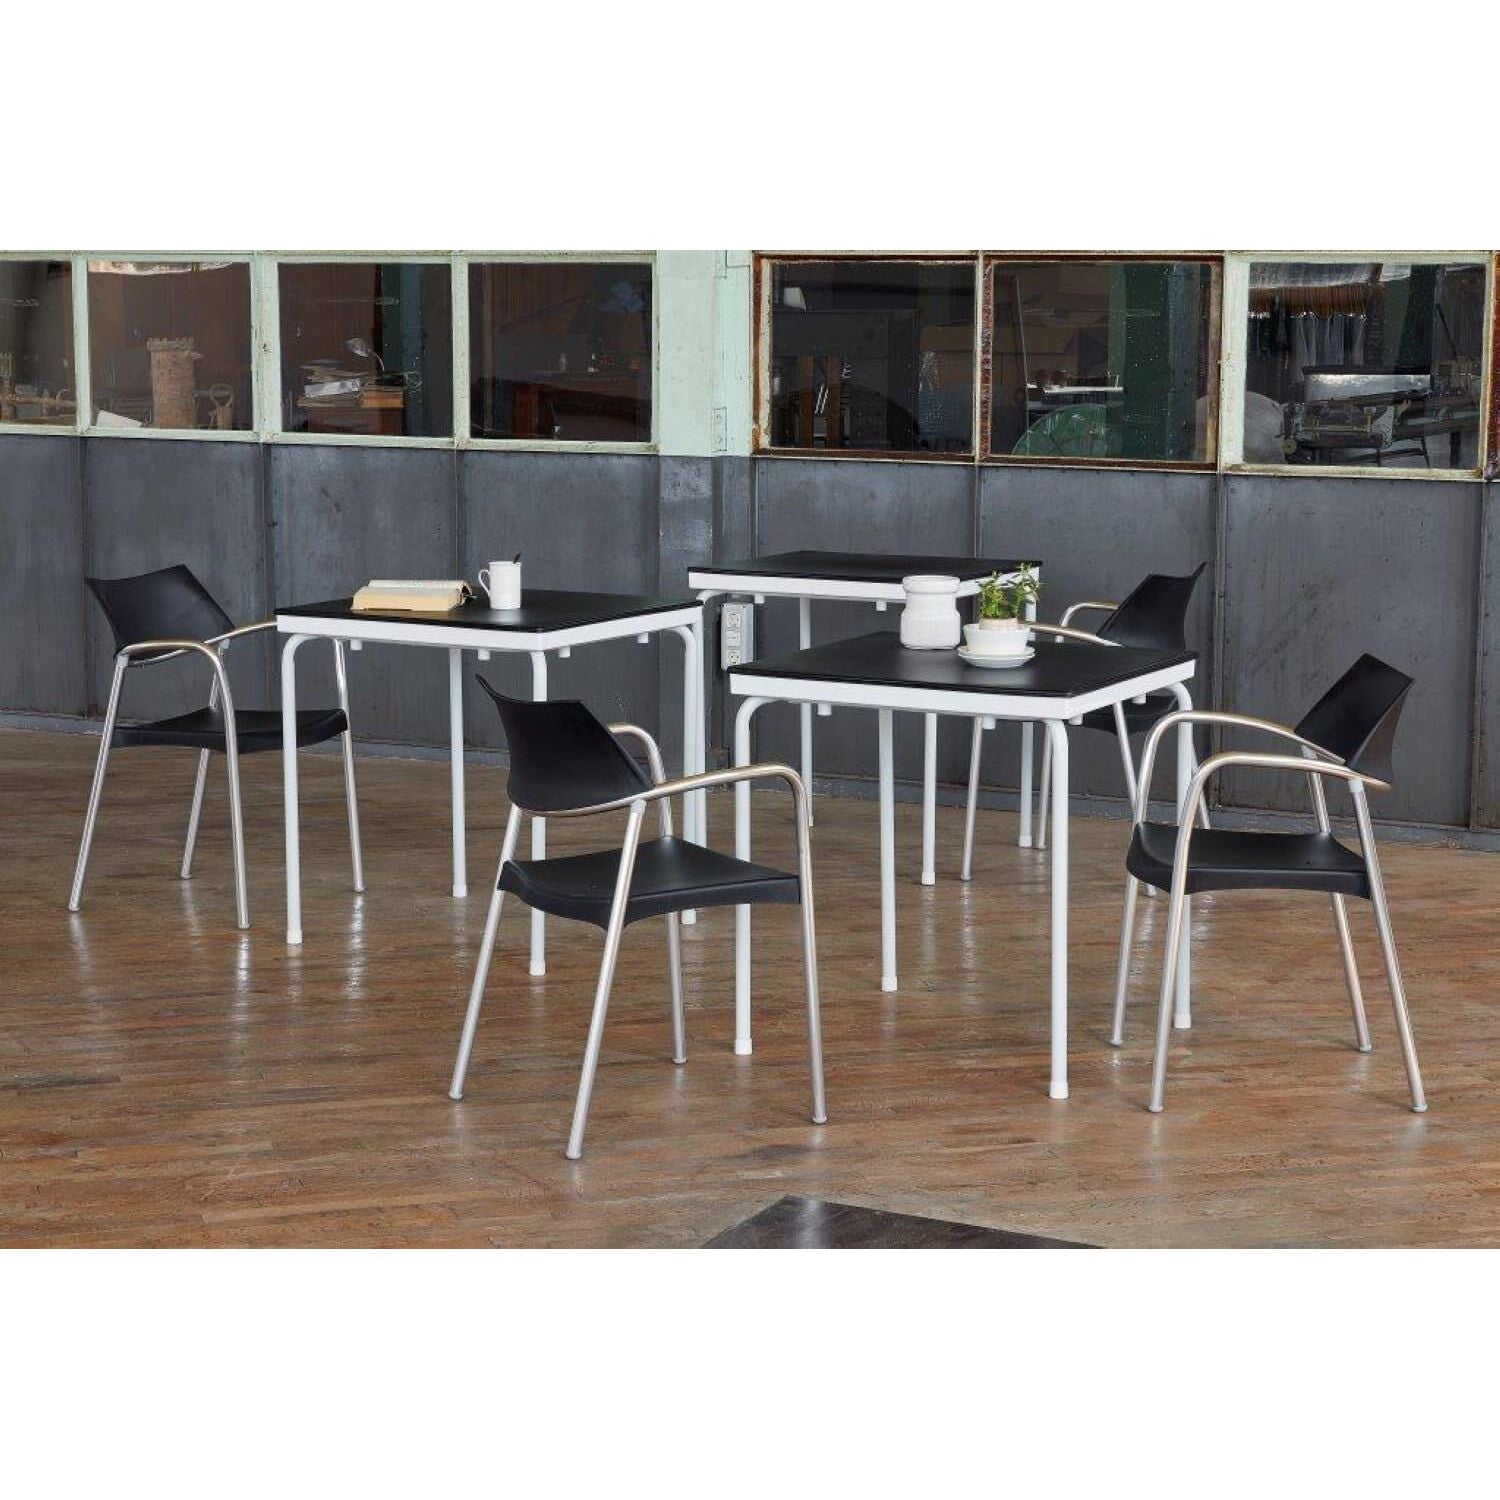 Resol point square table outdoor 80x80 white base - white